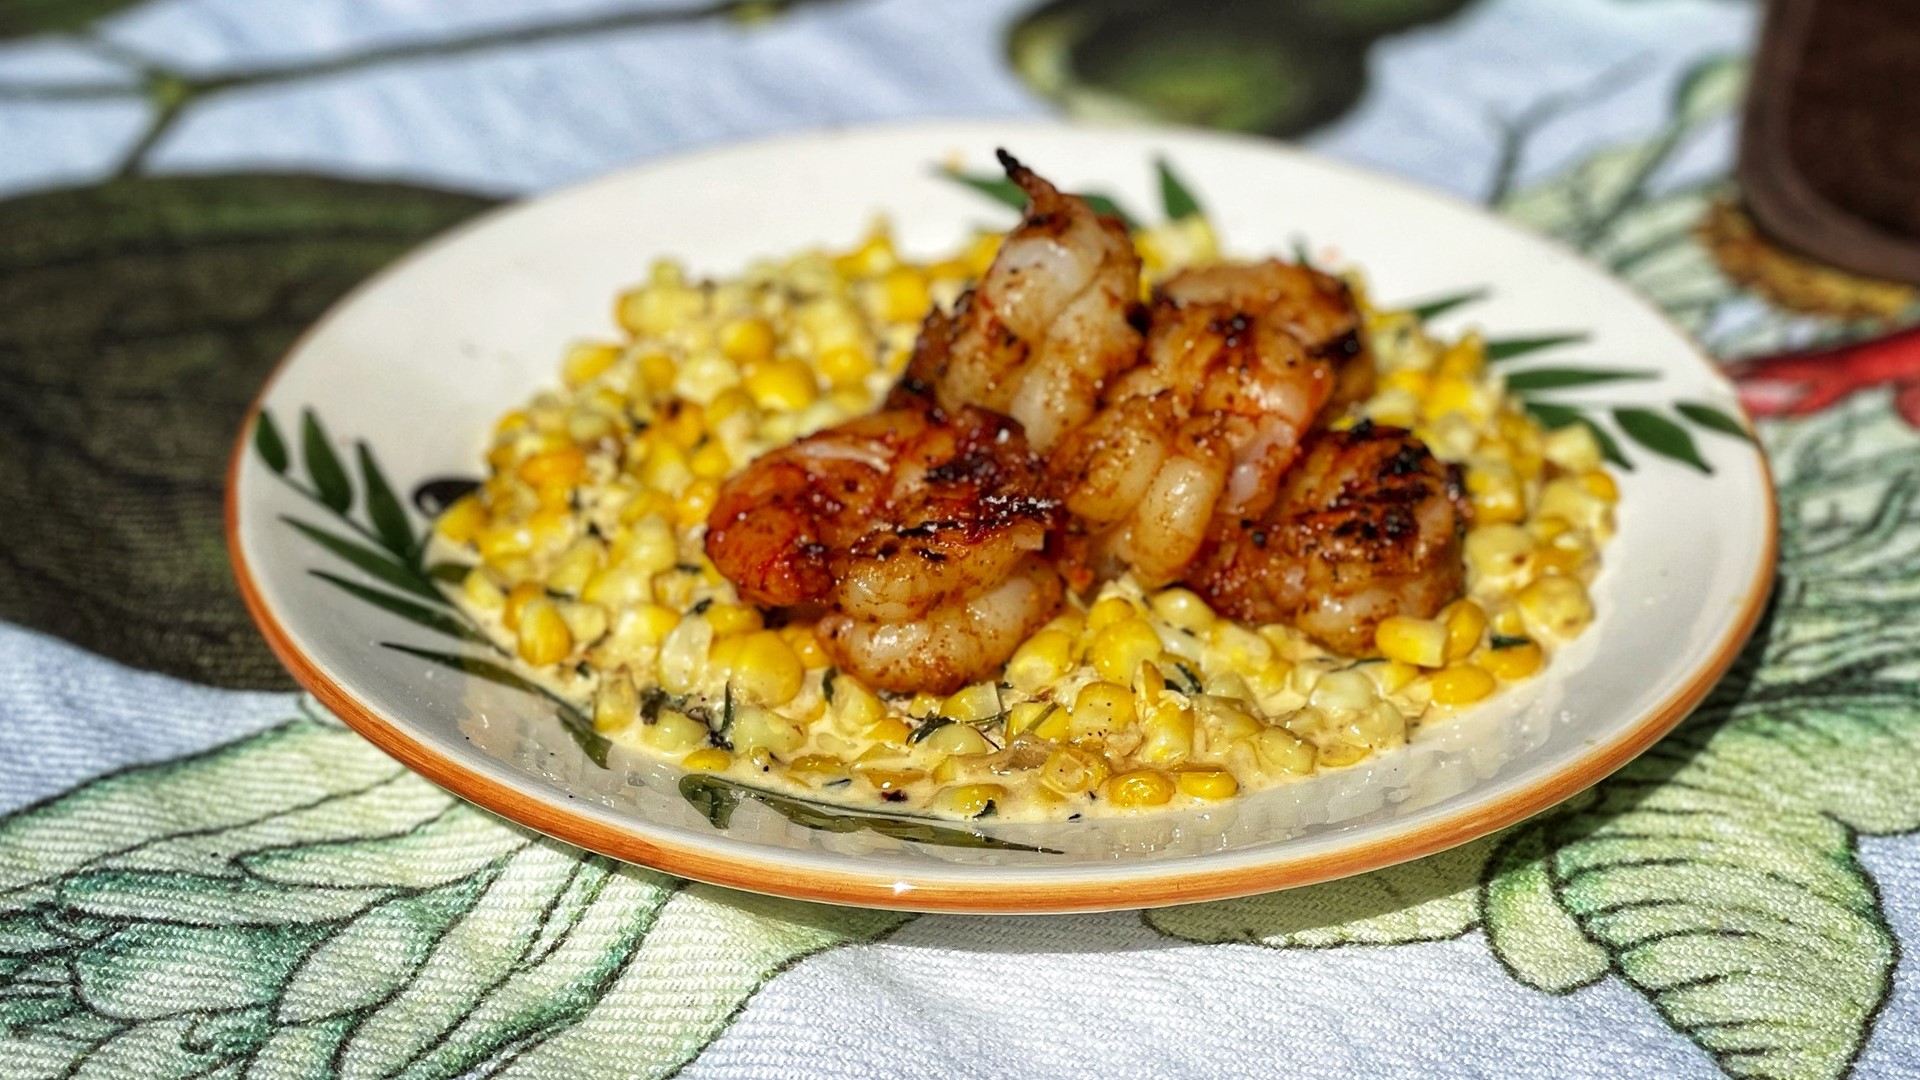 Fresh corn off the cob pairs perfectly with the southern staple. #k5evening